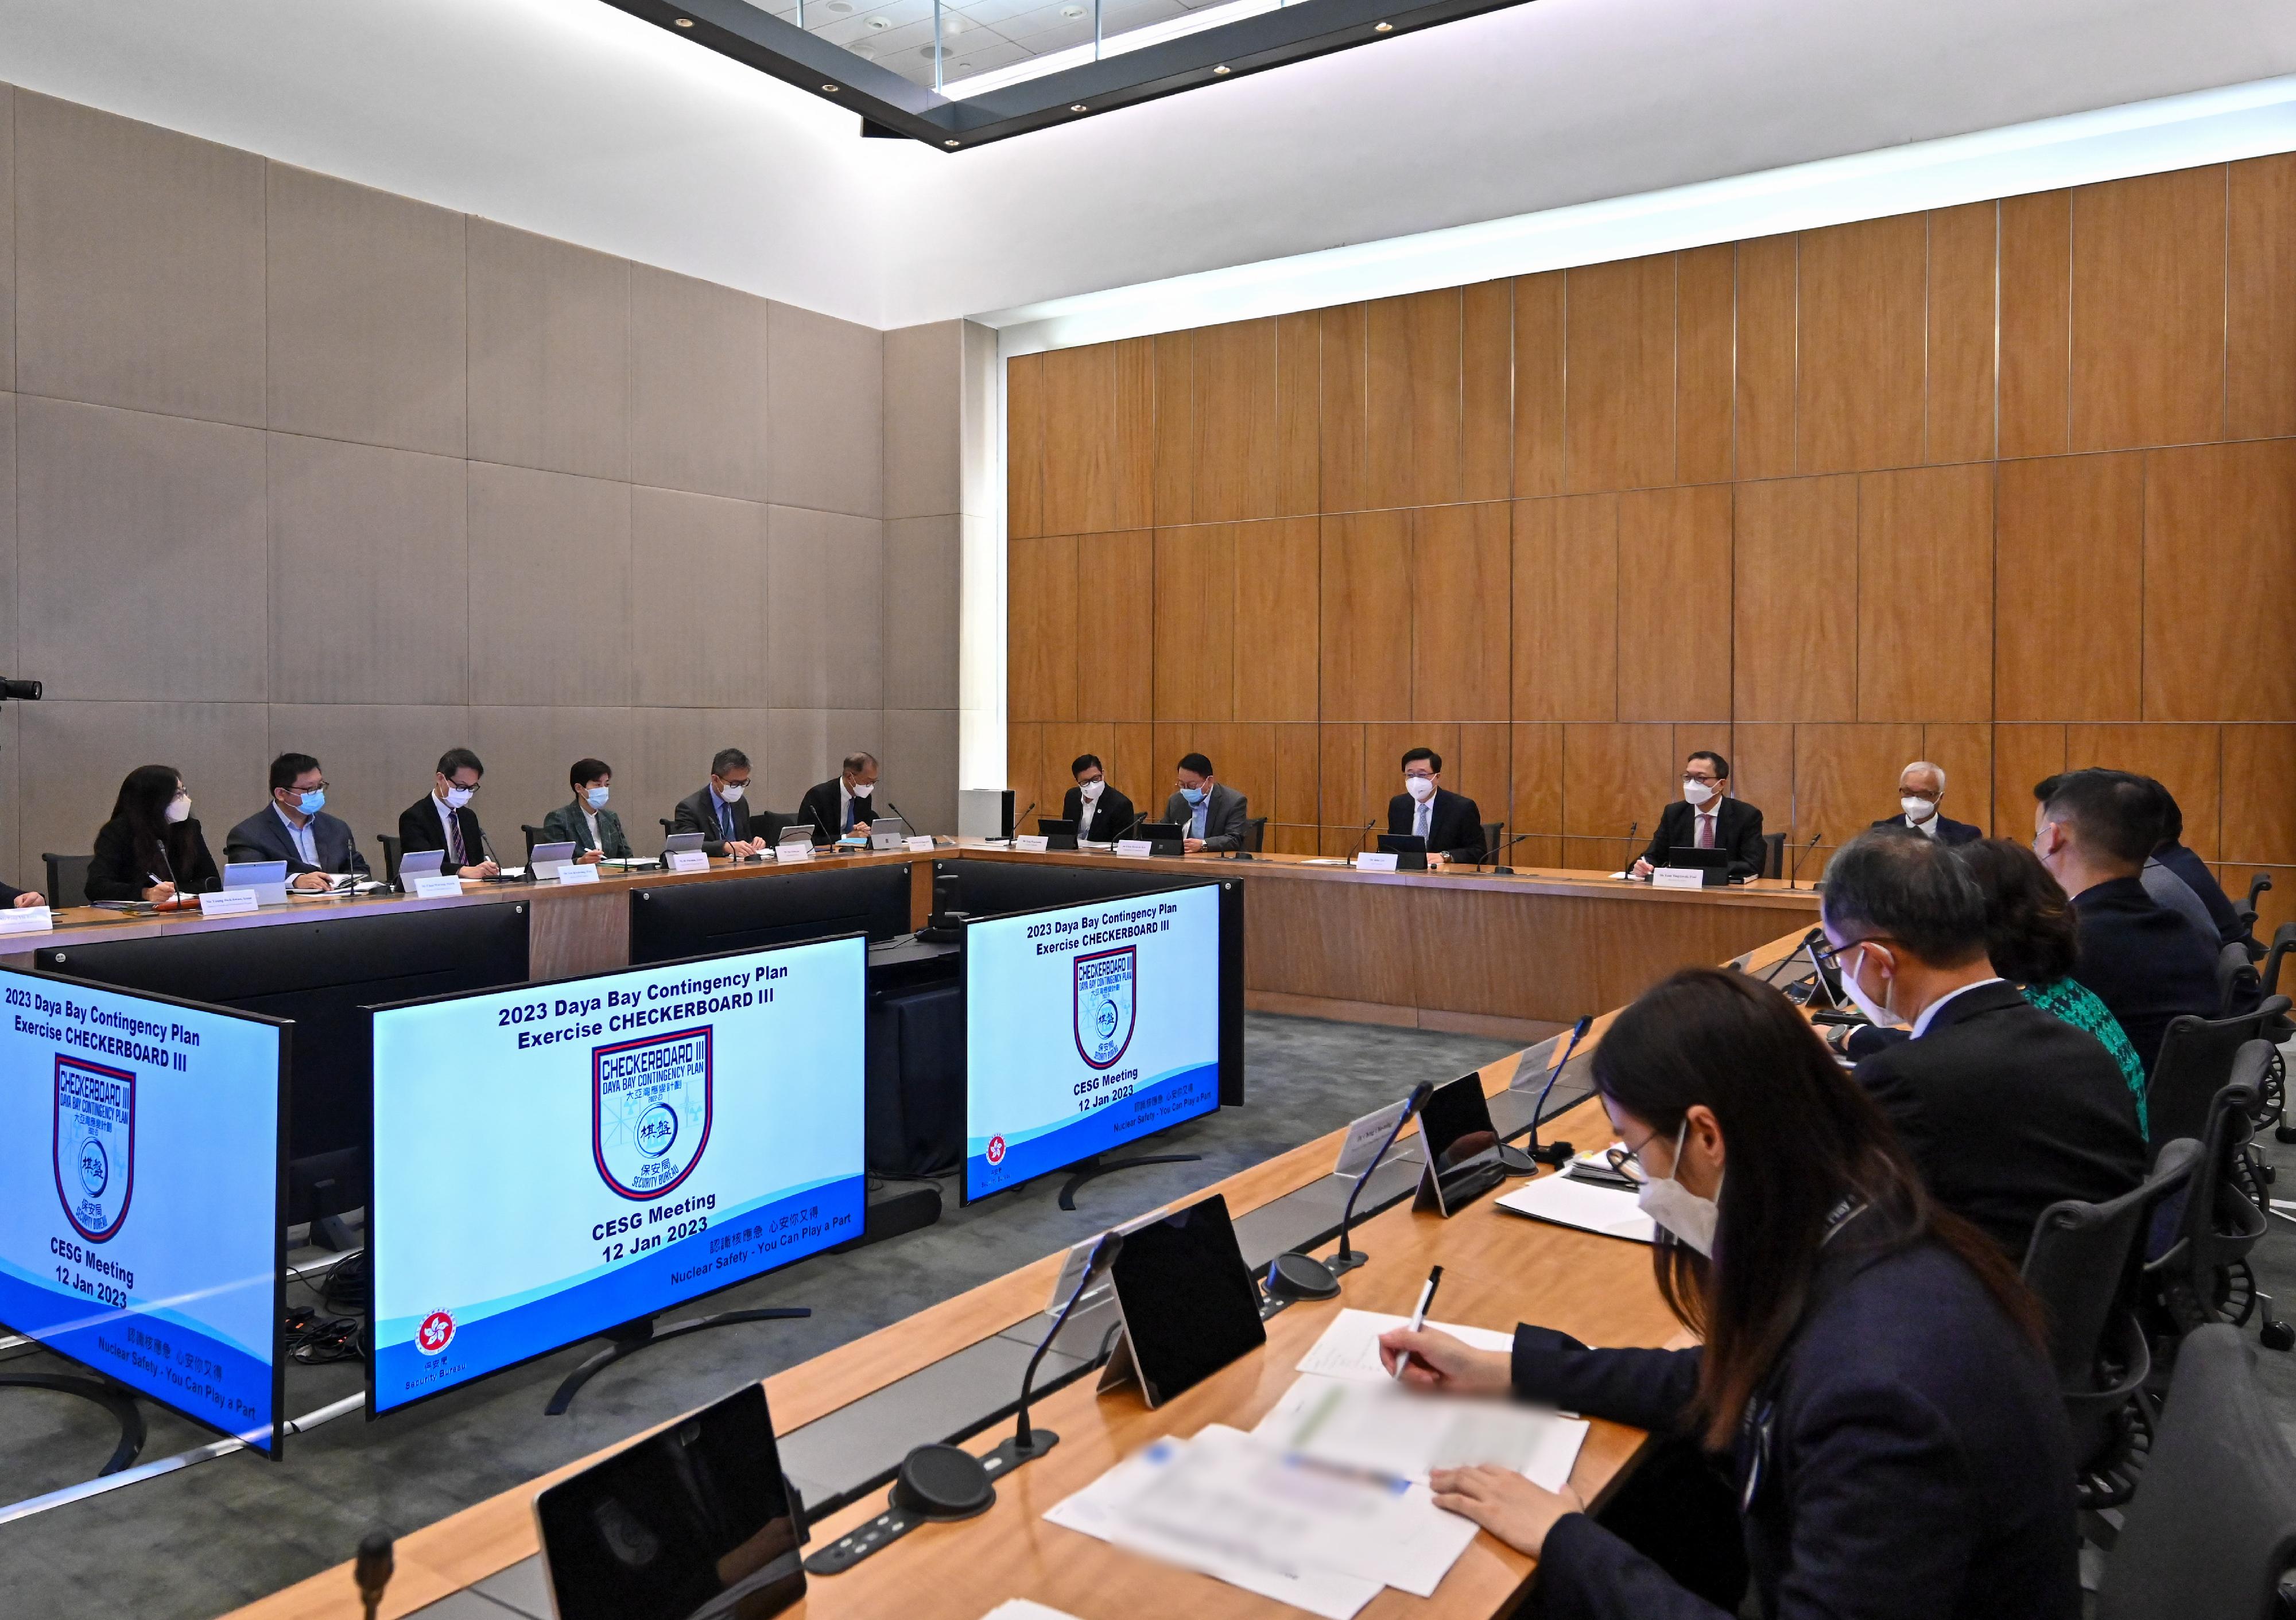 The Government conducted an inter-departmental exercise, "Checkerboard III", today (January 12). Photo shows the Chief Executive's Steering Group chaired by the Chief Executive, Mr John Lee, convening a meeting and deliberating on recommendations made by the Implementation Task Force led by the Secretary for Security, Mr Tang Ping-keung, in a simulated response to the incident.